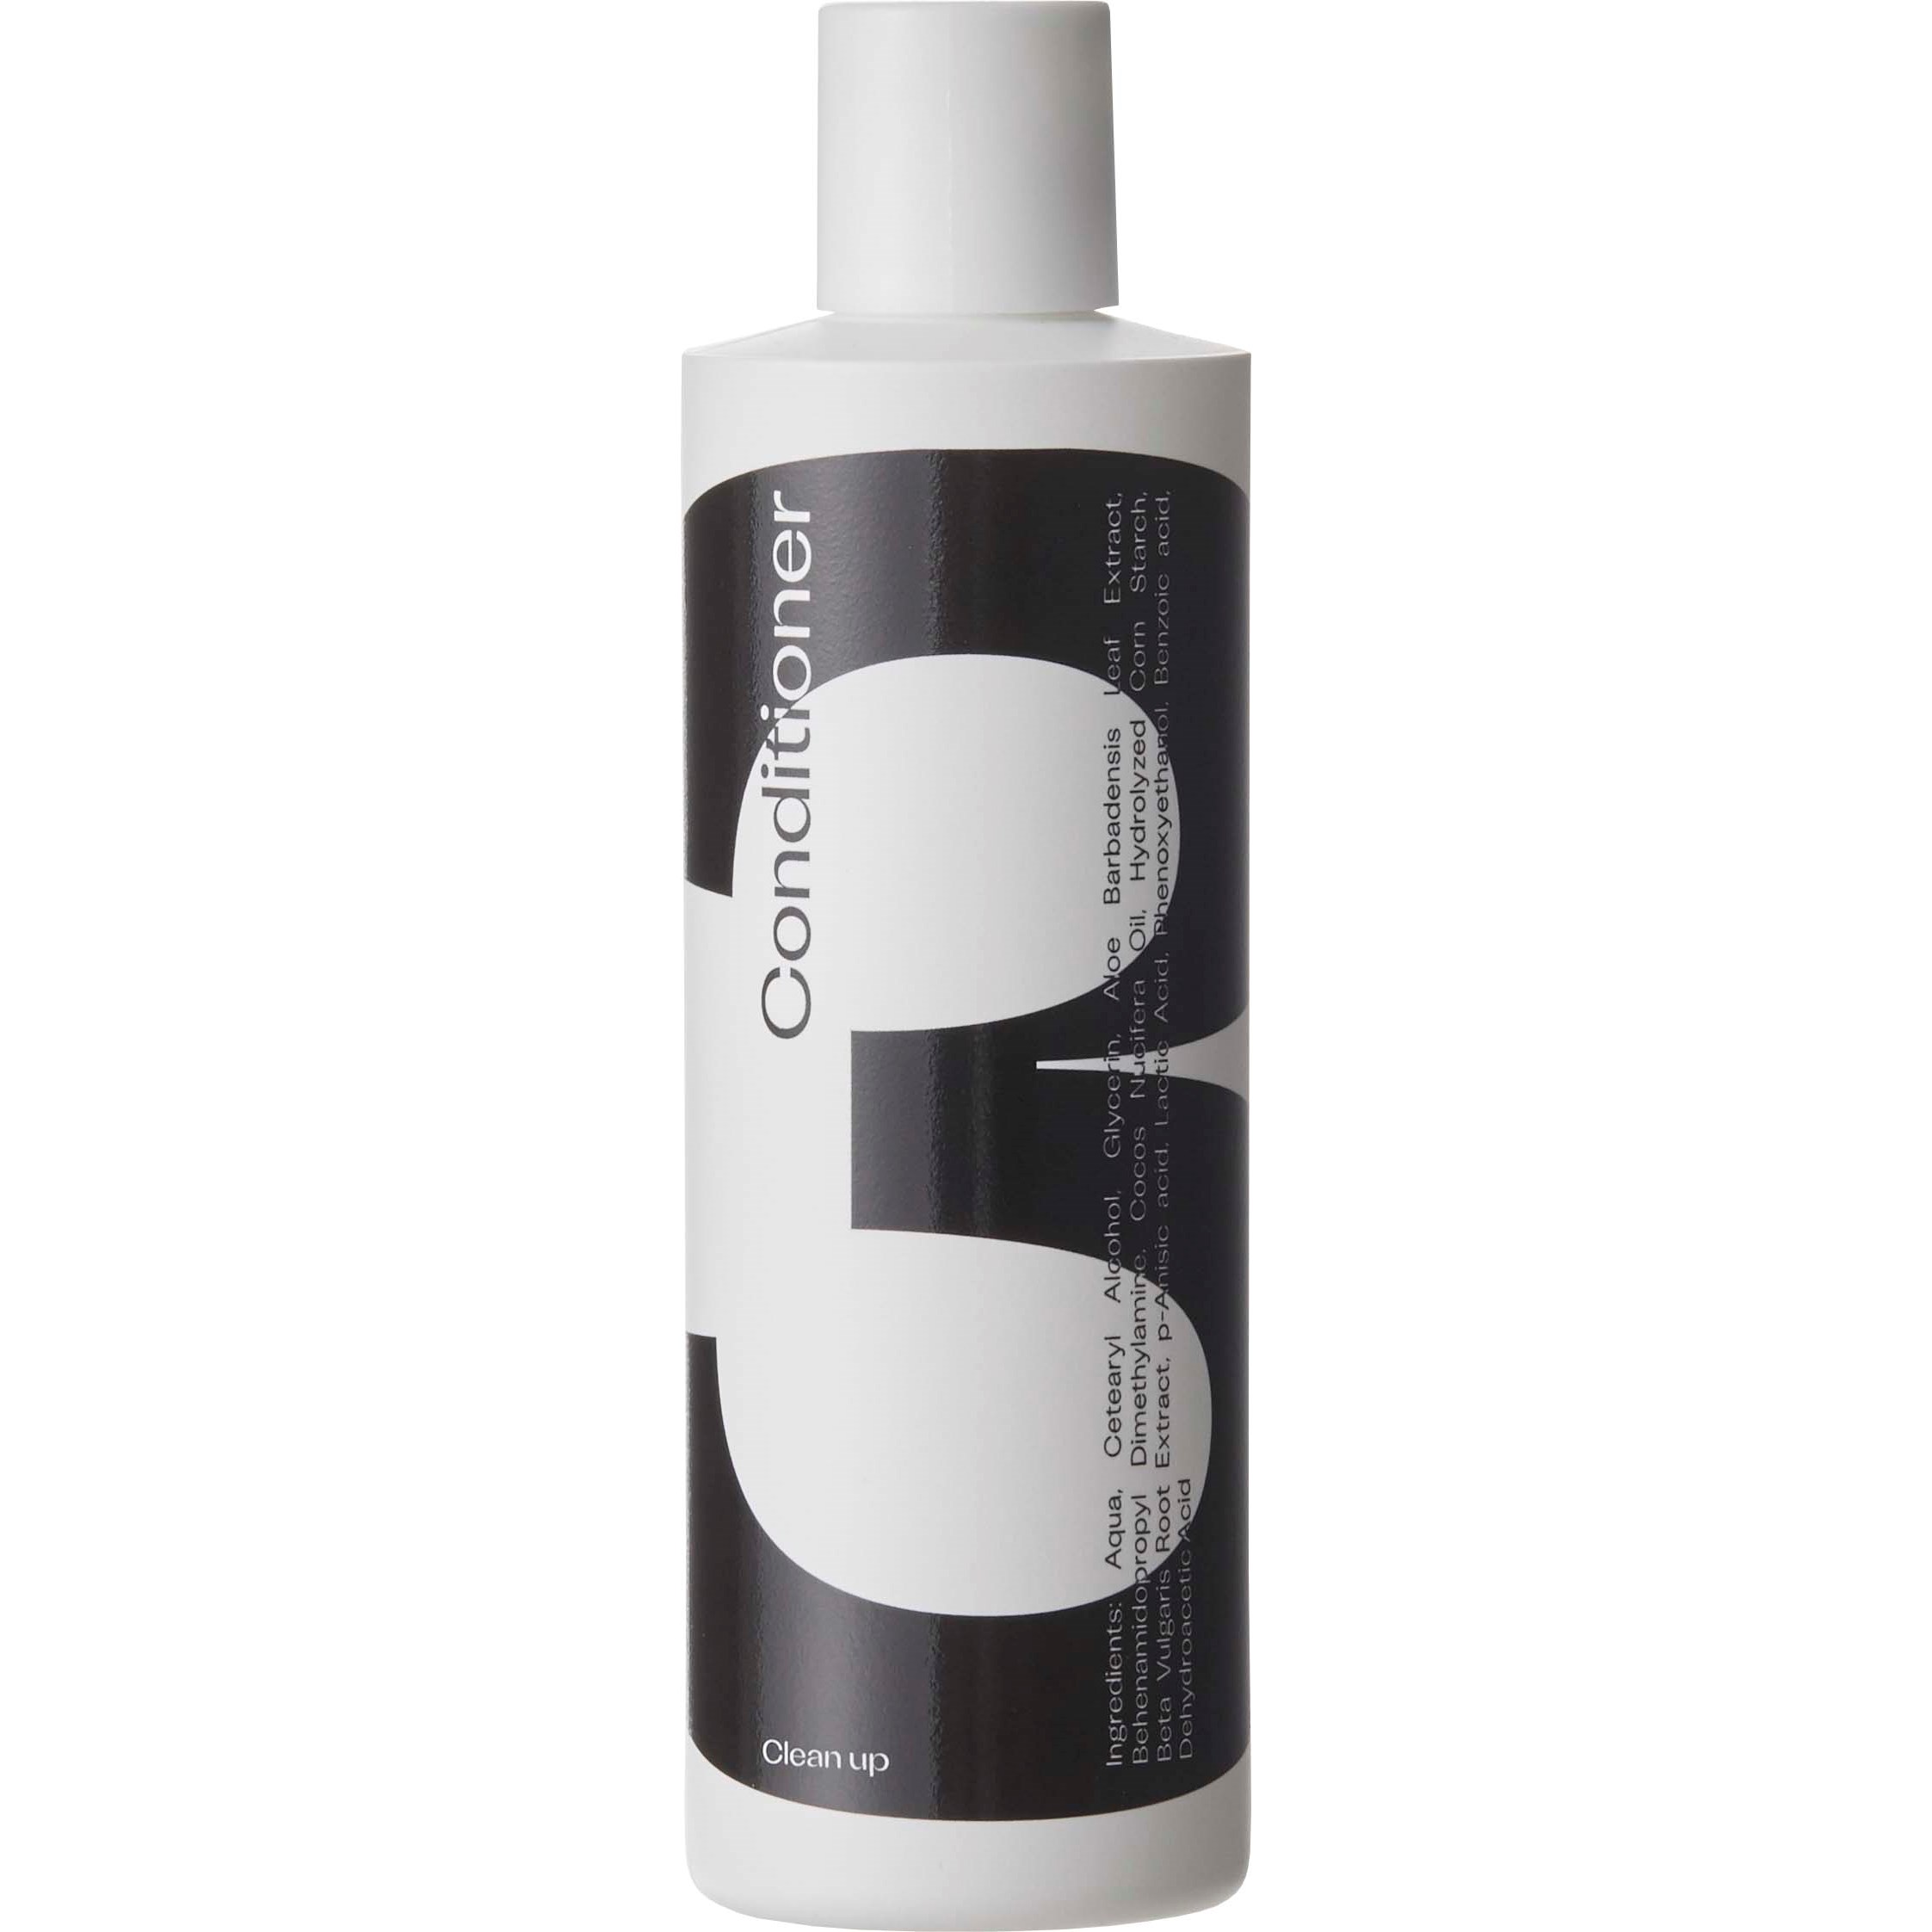 Clean up Haircare Conditioner 250 ml